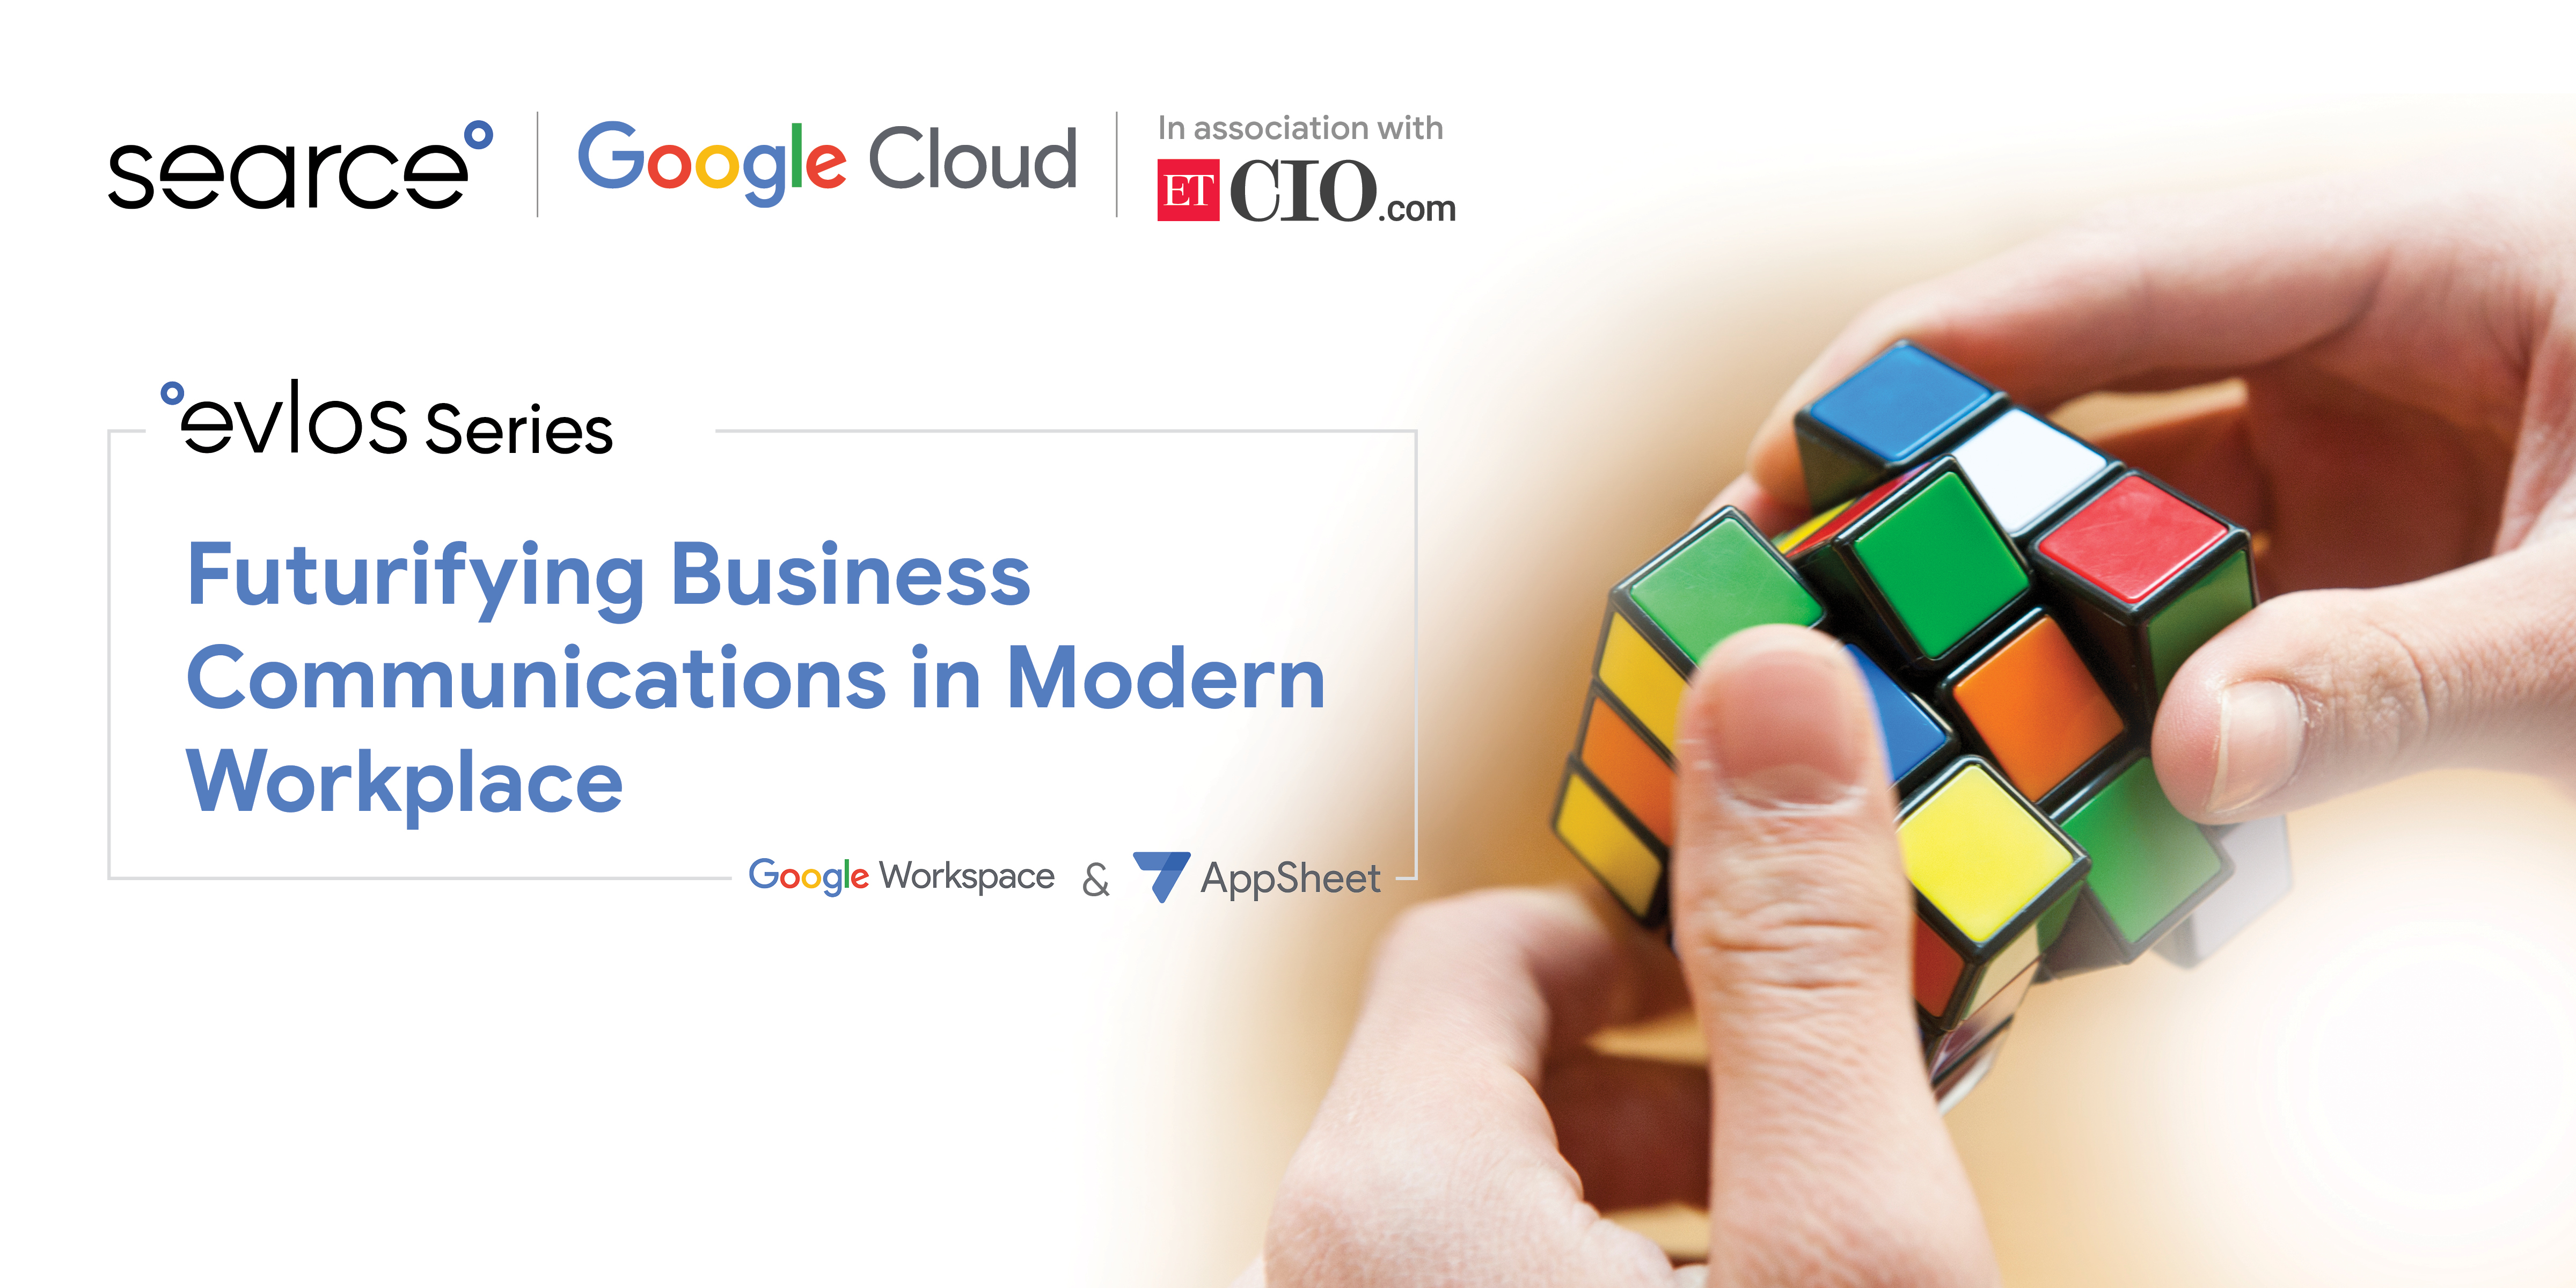 Futurifying Business Communication in Modern Workspace Organized by ETCIO and Searce Google Cloud - YouTube